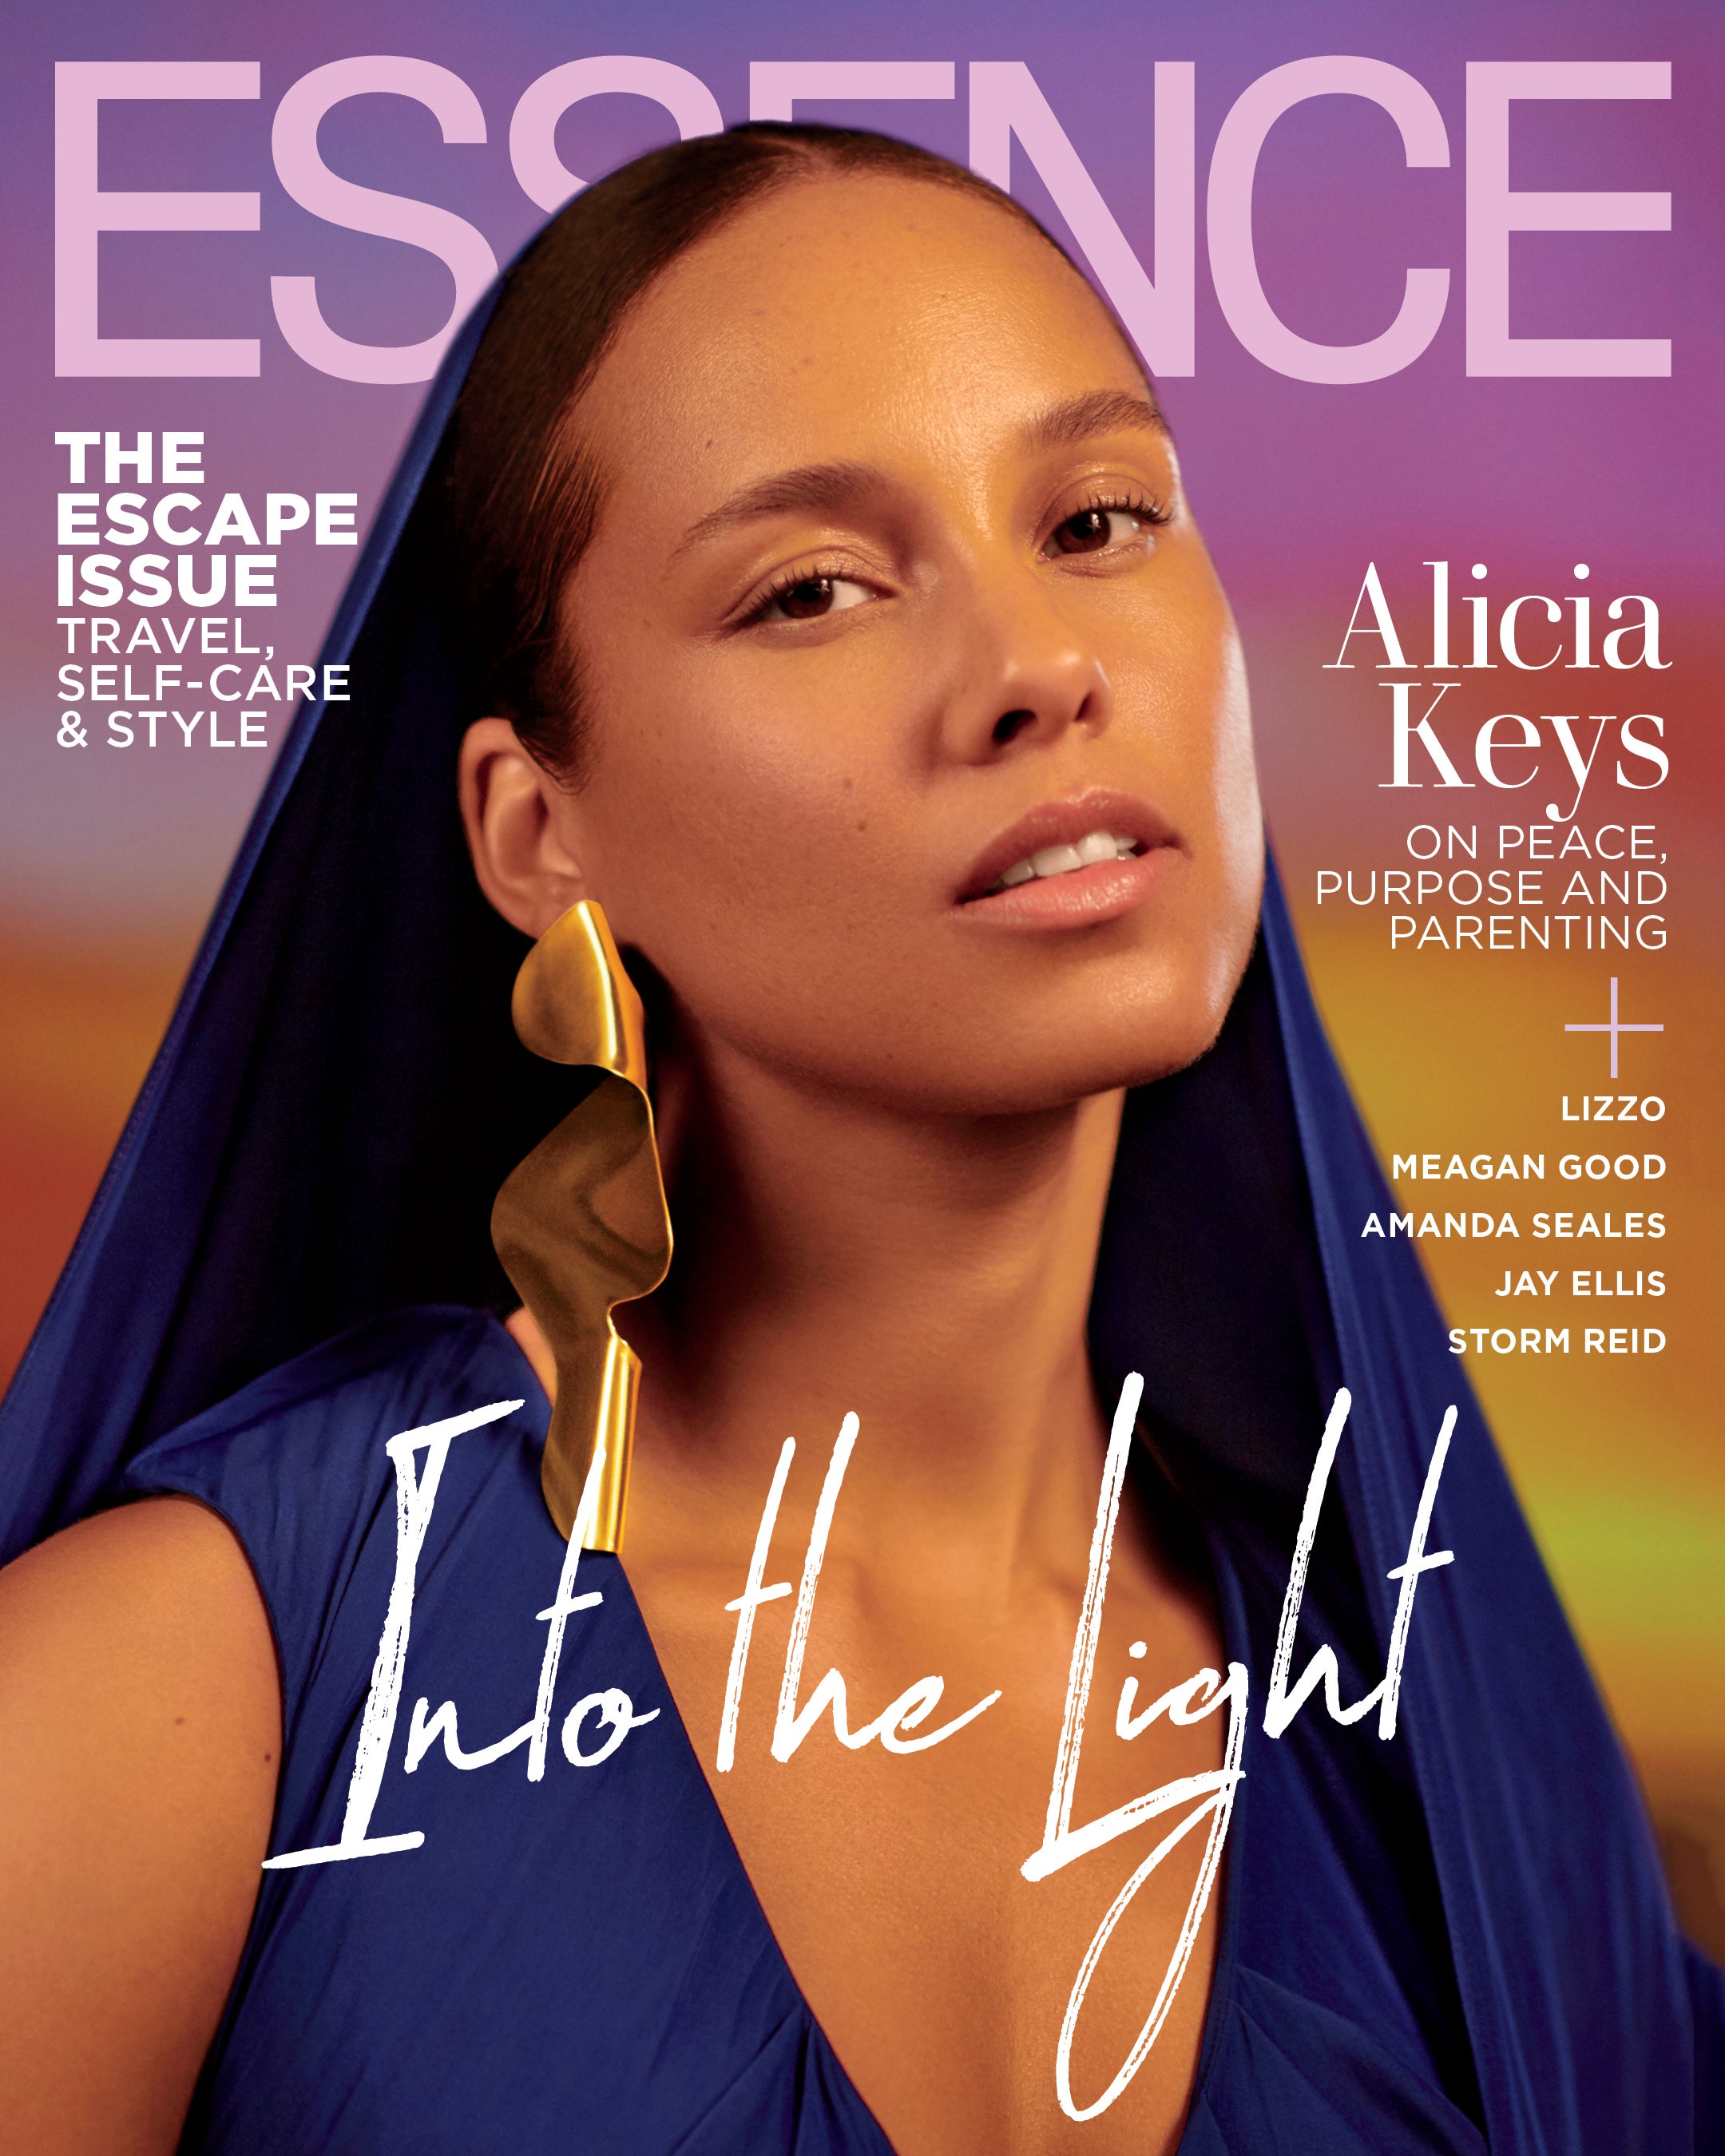 Alicia Keys’ Thoughts On Being A Grown Woman and Finding Your Bliss